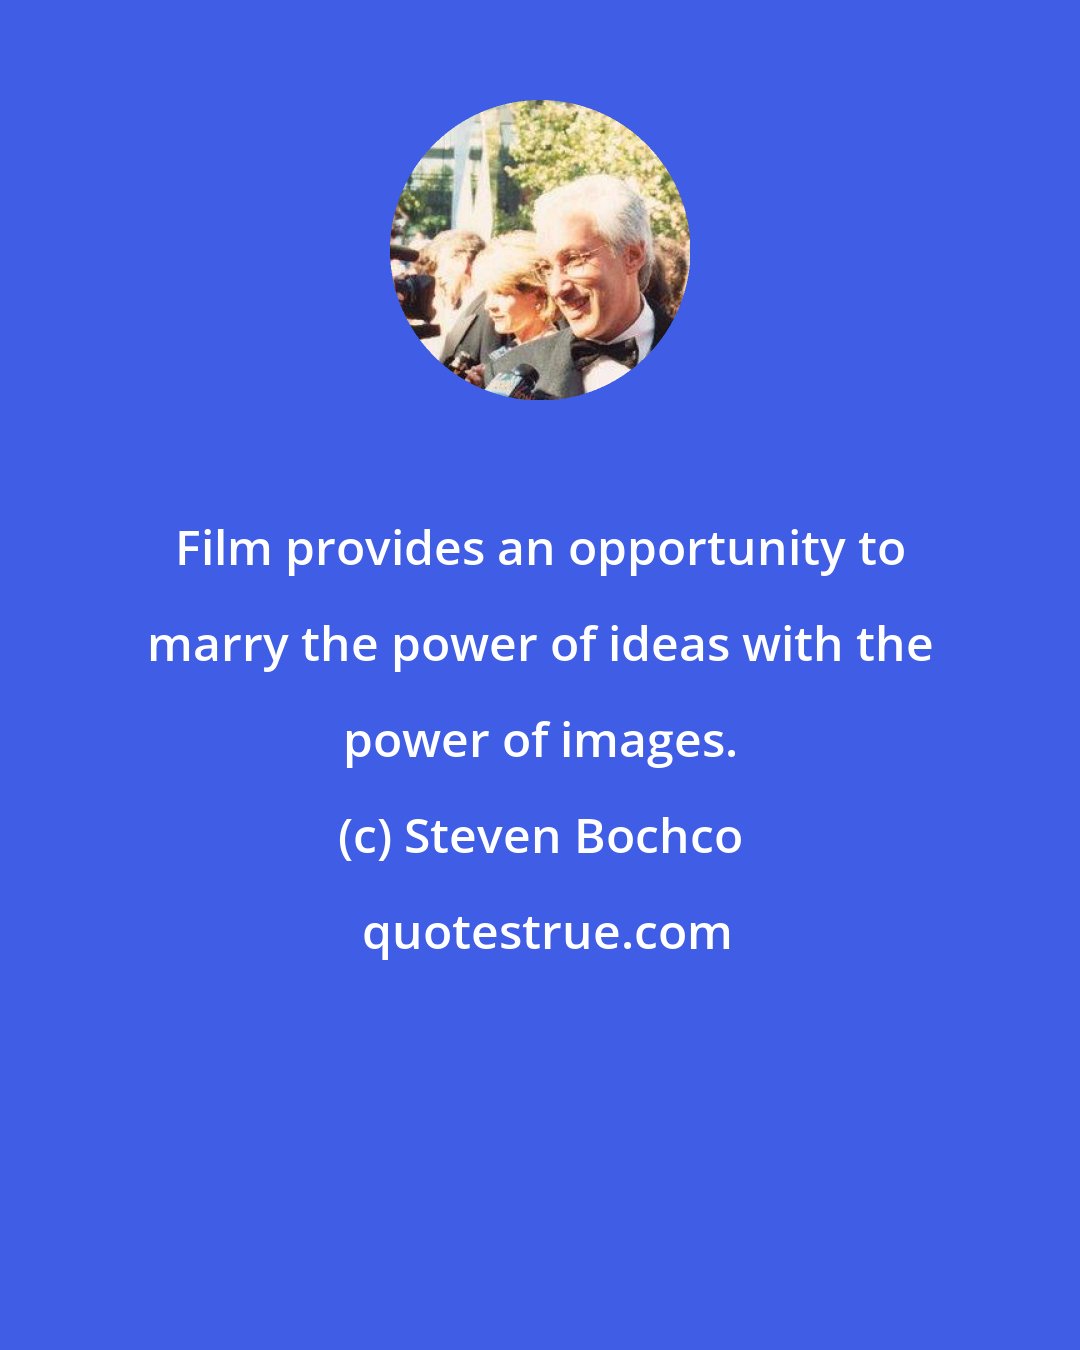 Steven Bochco: Film provides an opportunity to marry the power of ideas with the power of images.